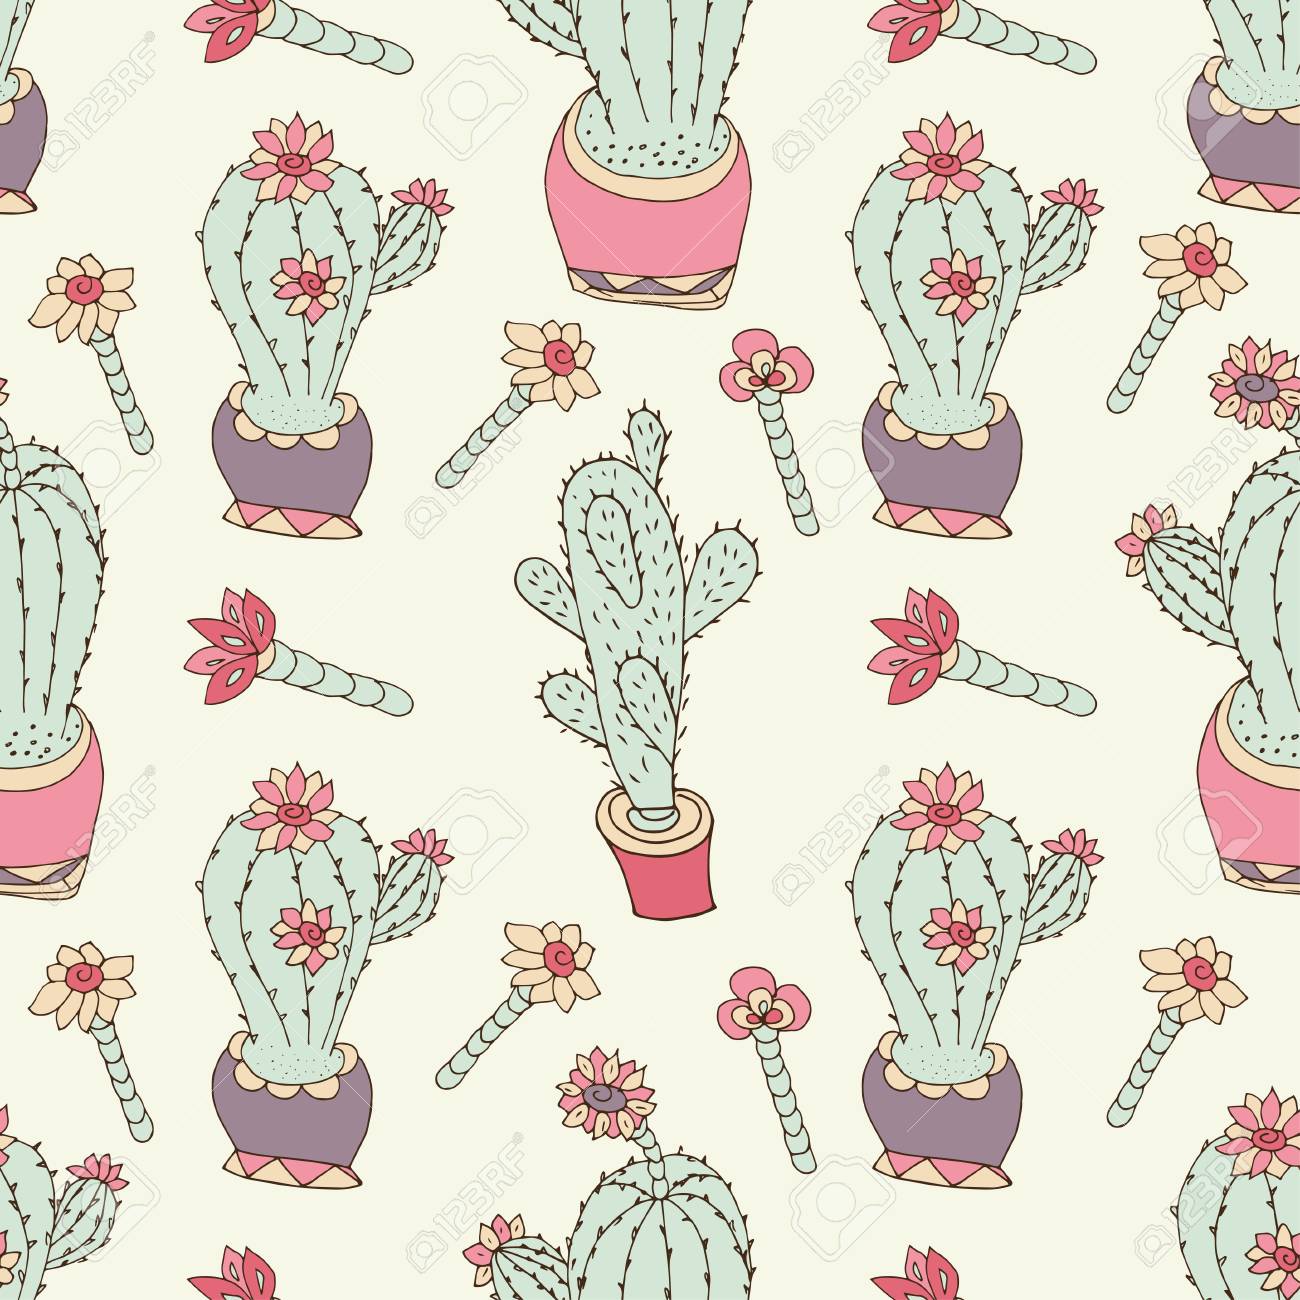 Cactus Wallpaper Background Texture Seamless Sketch Doodle